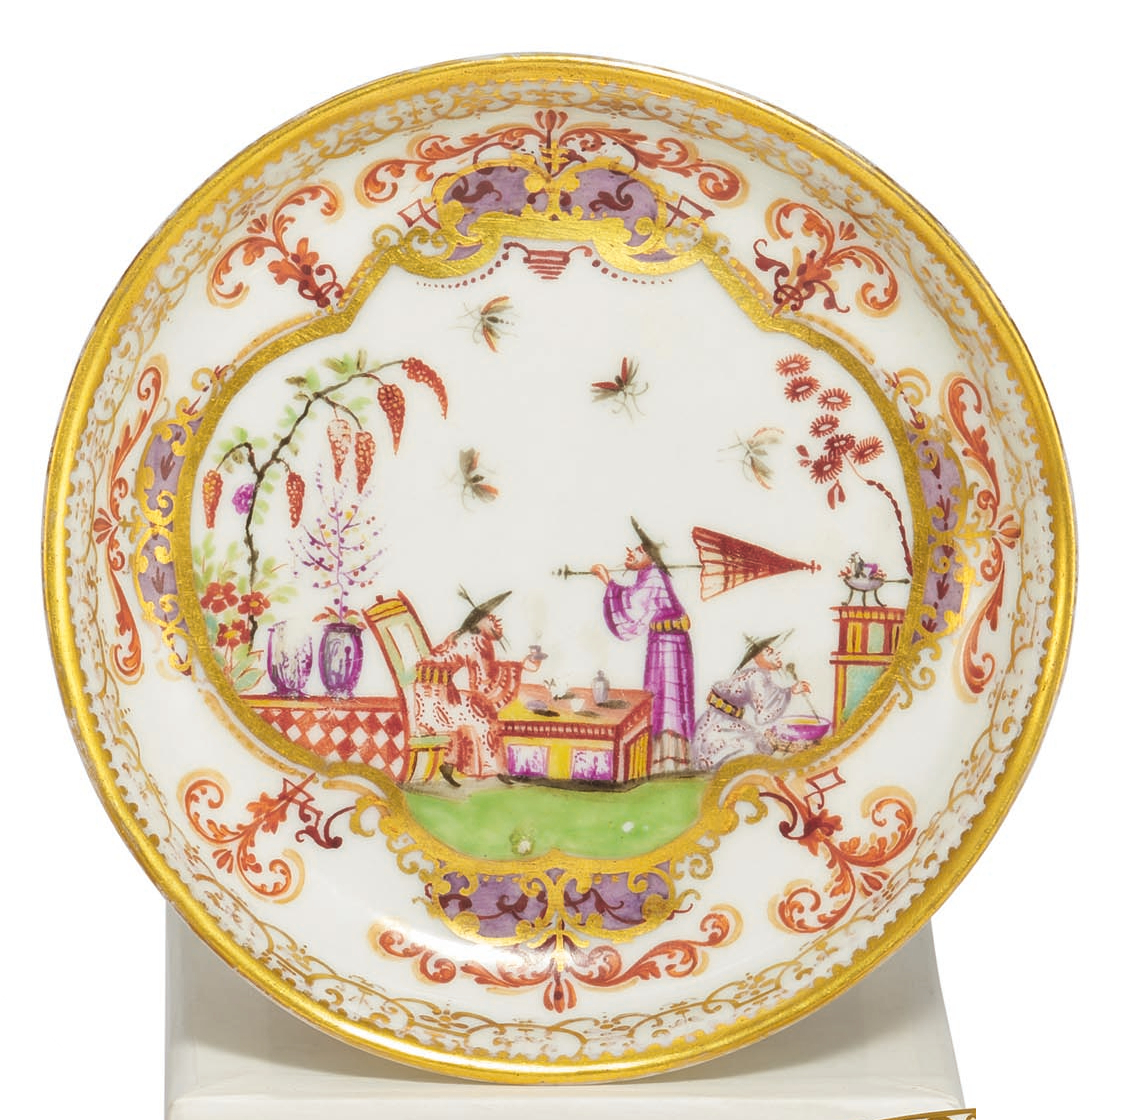 SMALL PORCELAIN SAUCER WITH CHINOISERIES